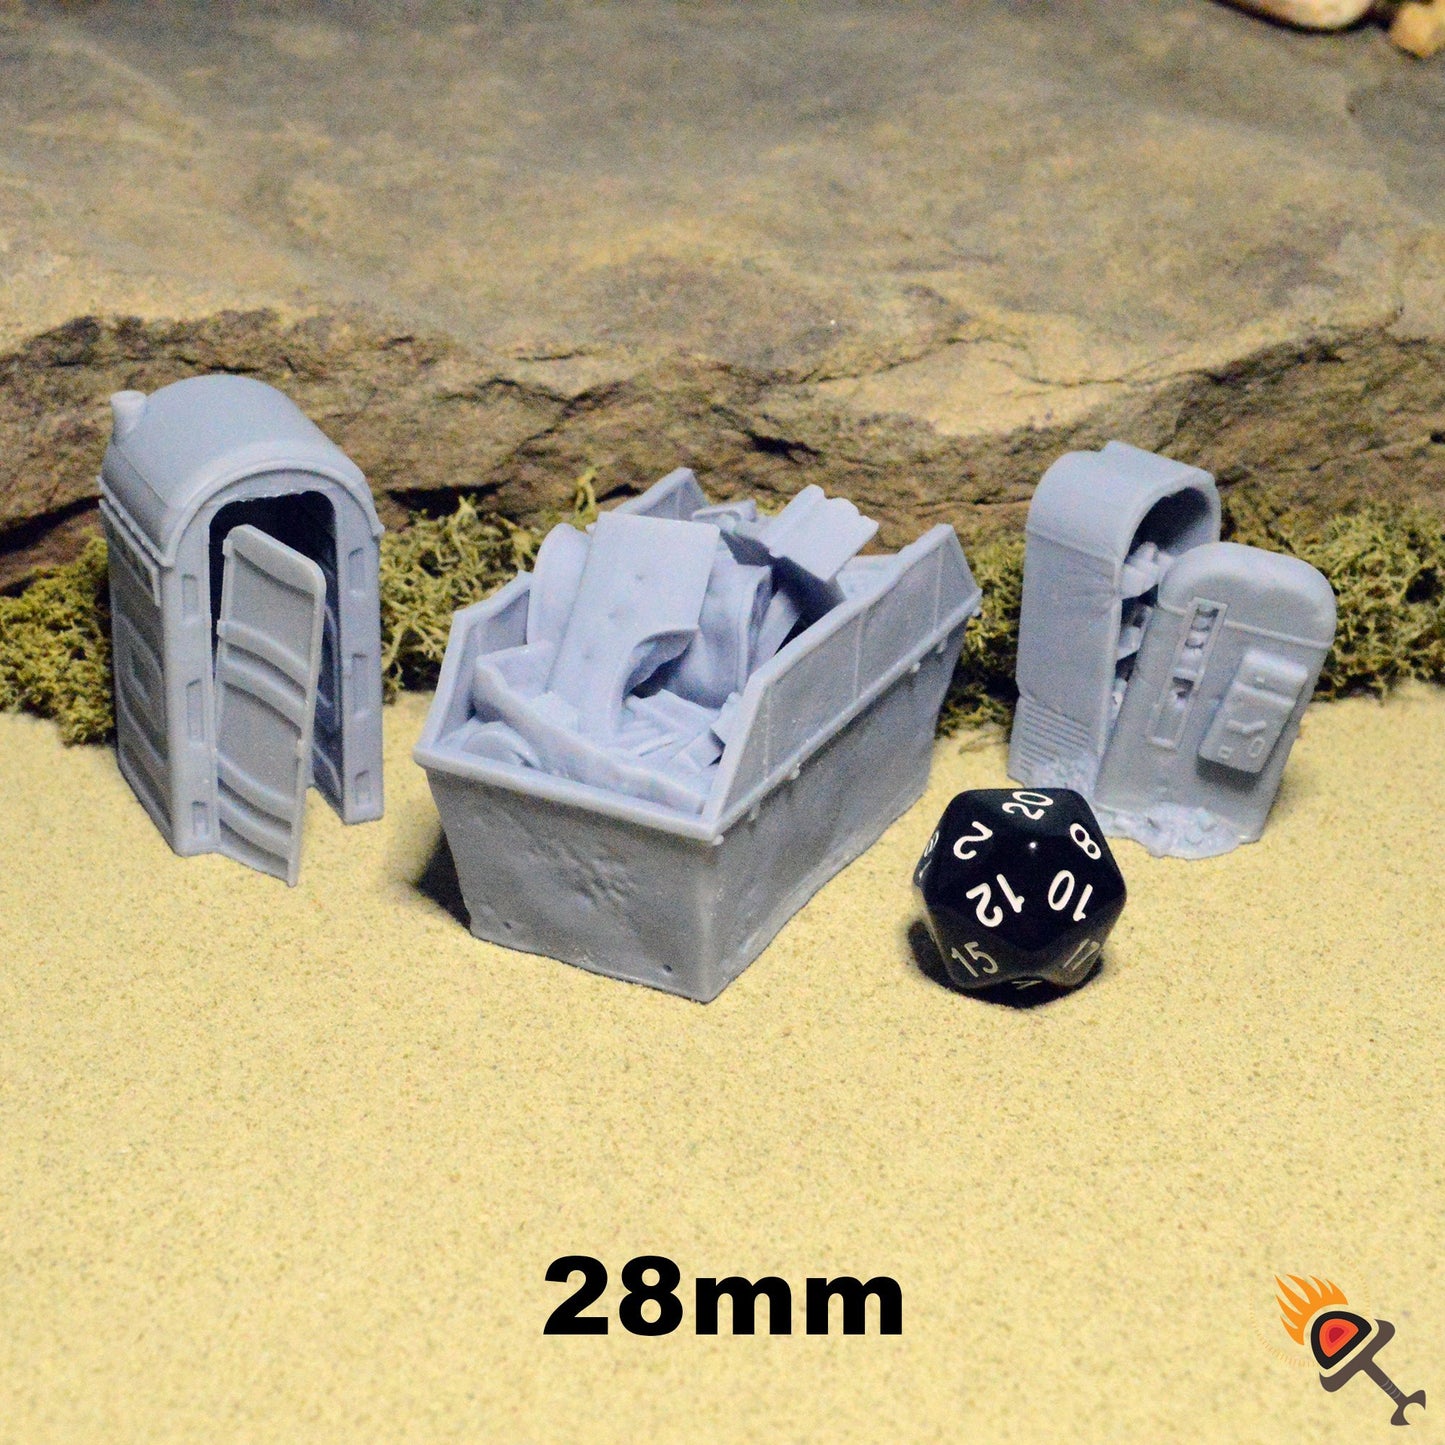 Scrapyard Vending Machine, Skip Bin and Toilet 15mm 20mm 28mm 32mm for Gaslands Terrain, Urban Fallout Post-Apocalyptic, This is Not a Test